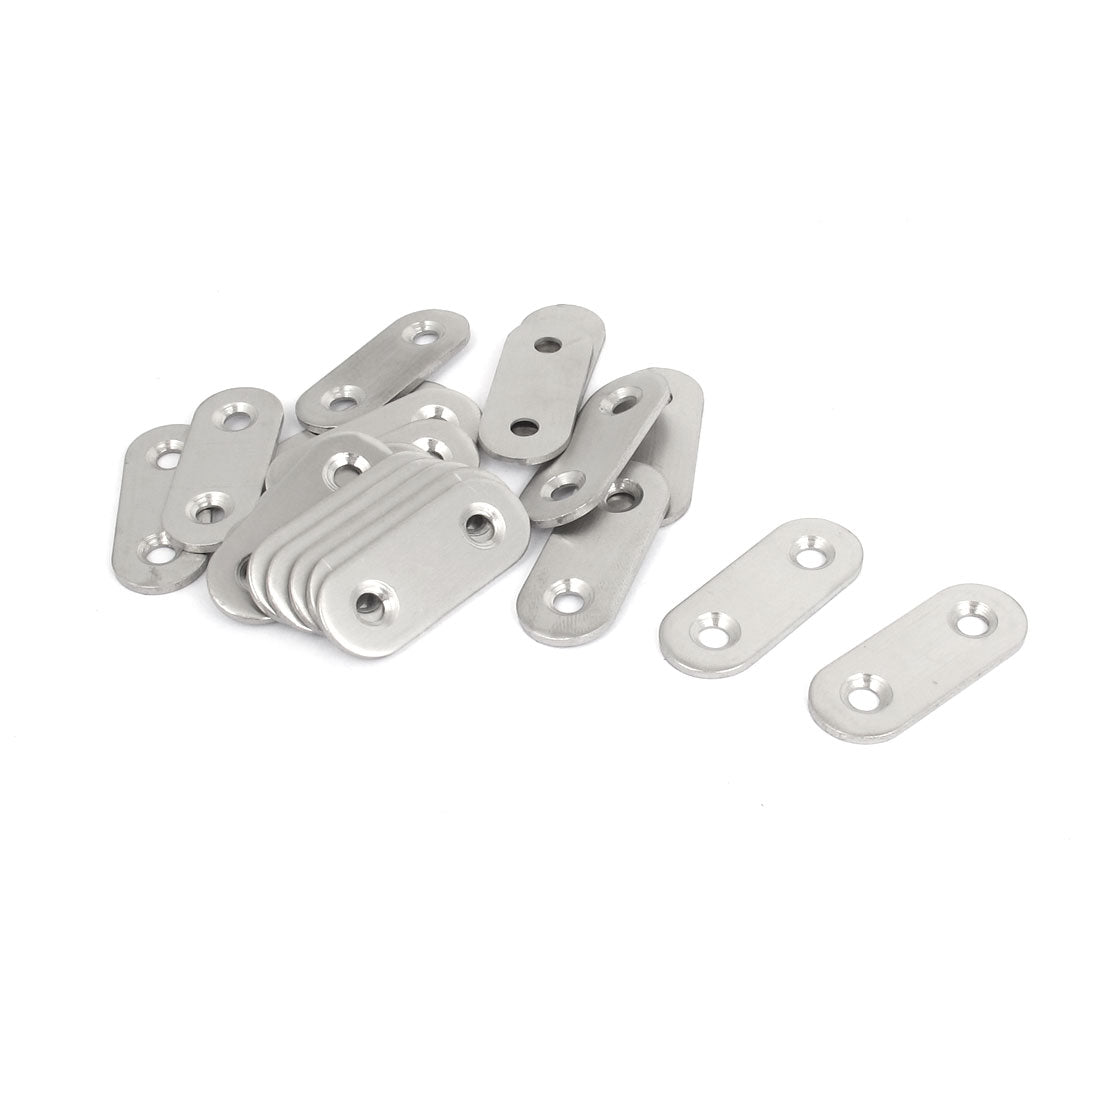 uxcell Uxcell 20pcs 40mm Stainless Steel Flat Brackets Straight Mending Repair Fixing Plates